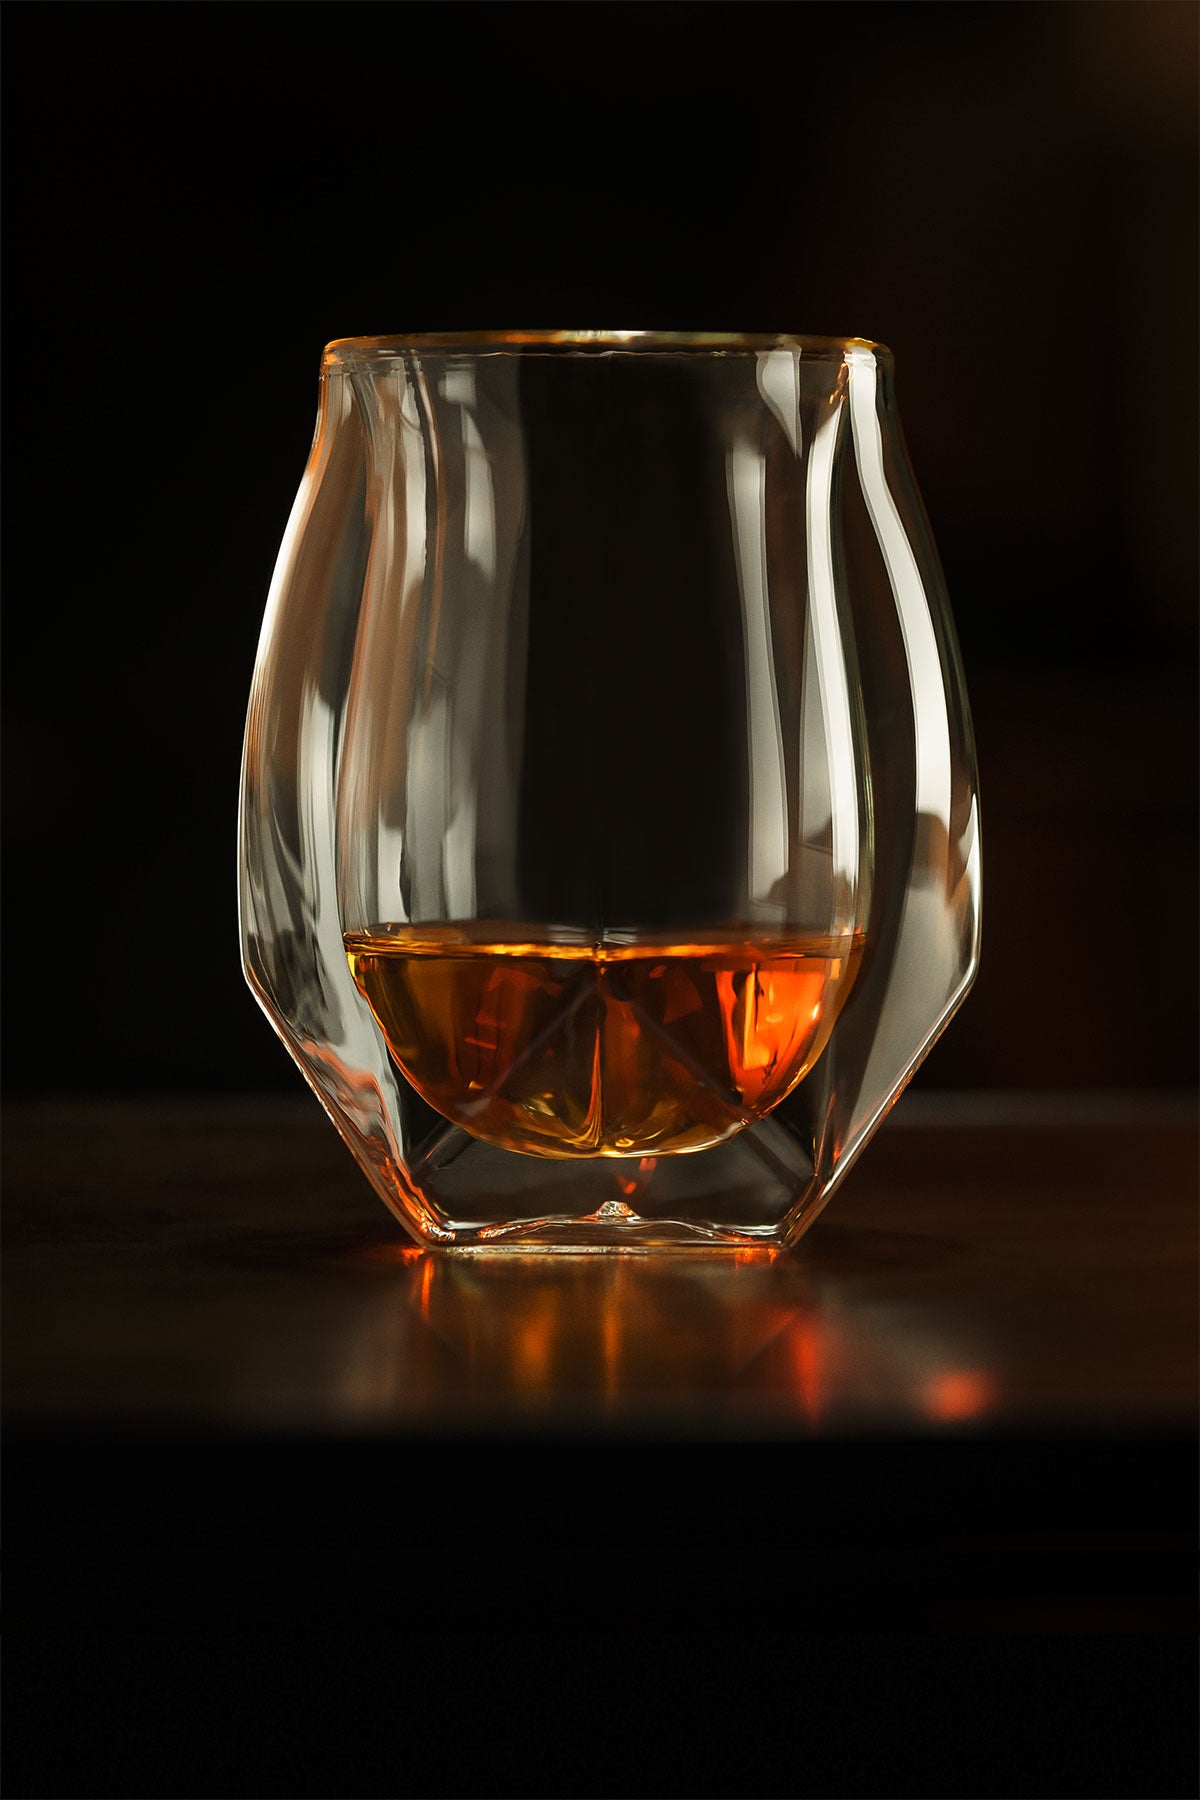 Our unique whisky glass in a darkened room with a sparkling orange hued bourbon whiskey inside. The curvature of the inner and outer walls highlighted against the dark background help illustrate the unique form of this award-winning glass..